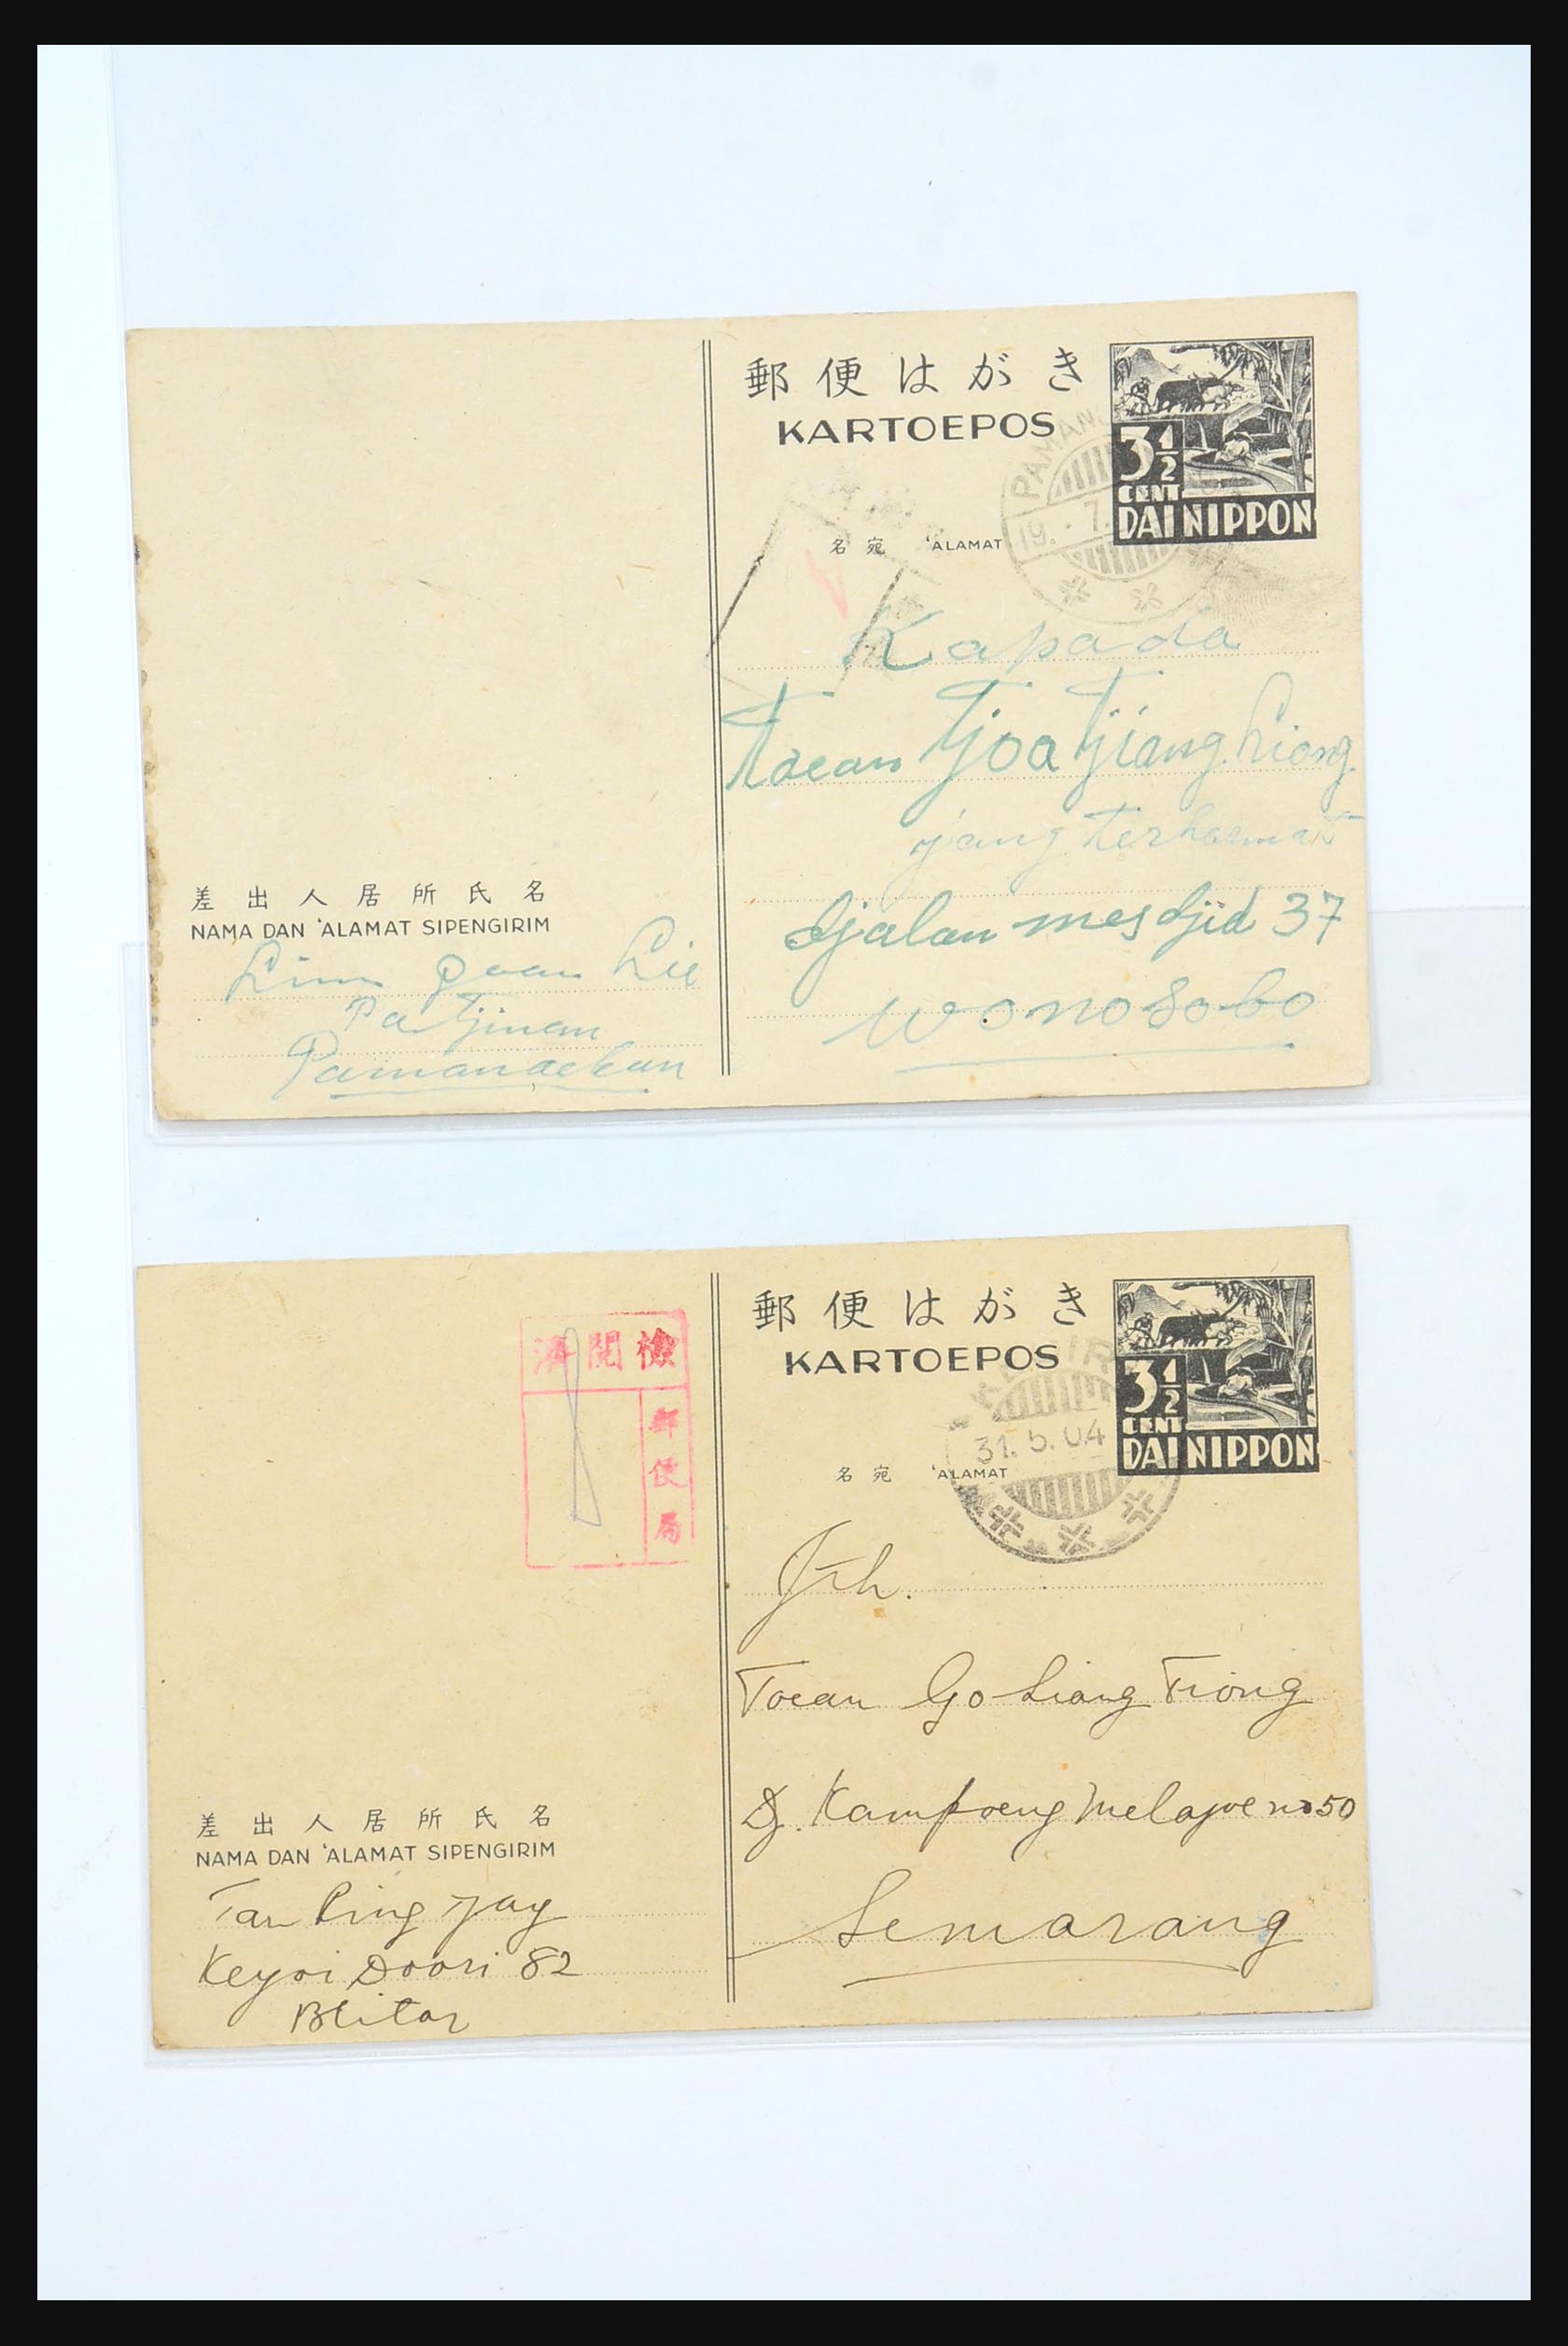 31362 096 - 31362 Netherlands Indies Japanese occupation covers 1942-1945.